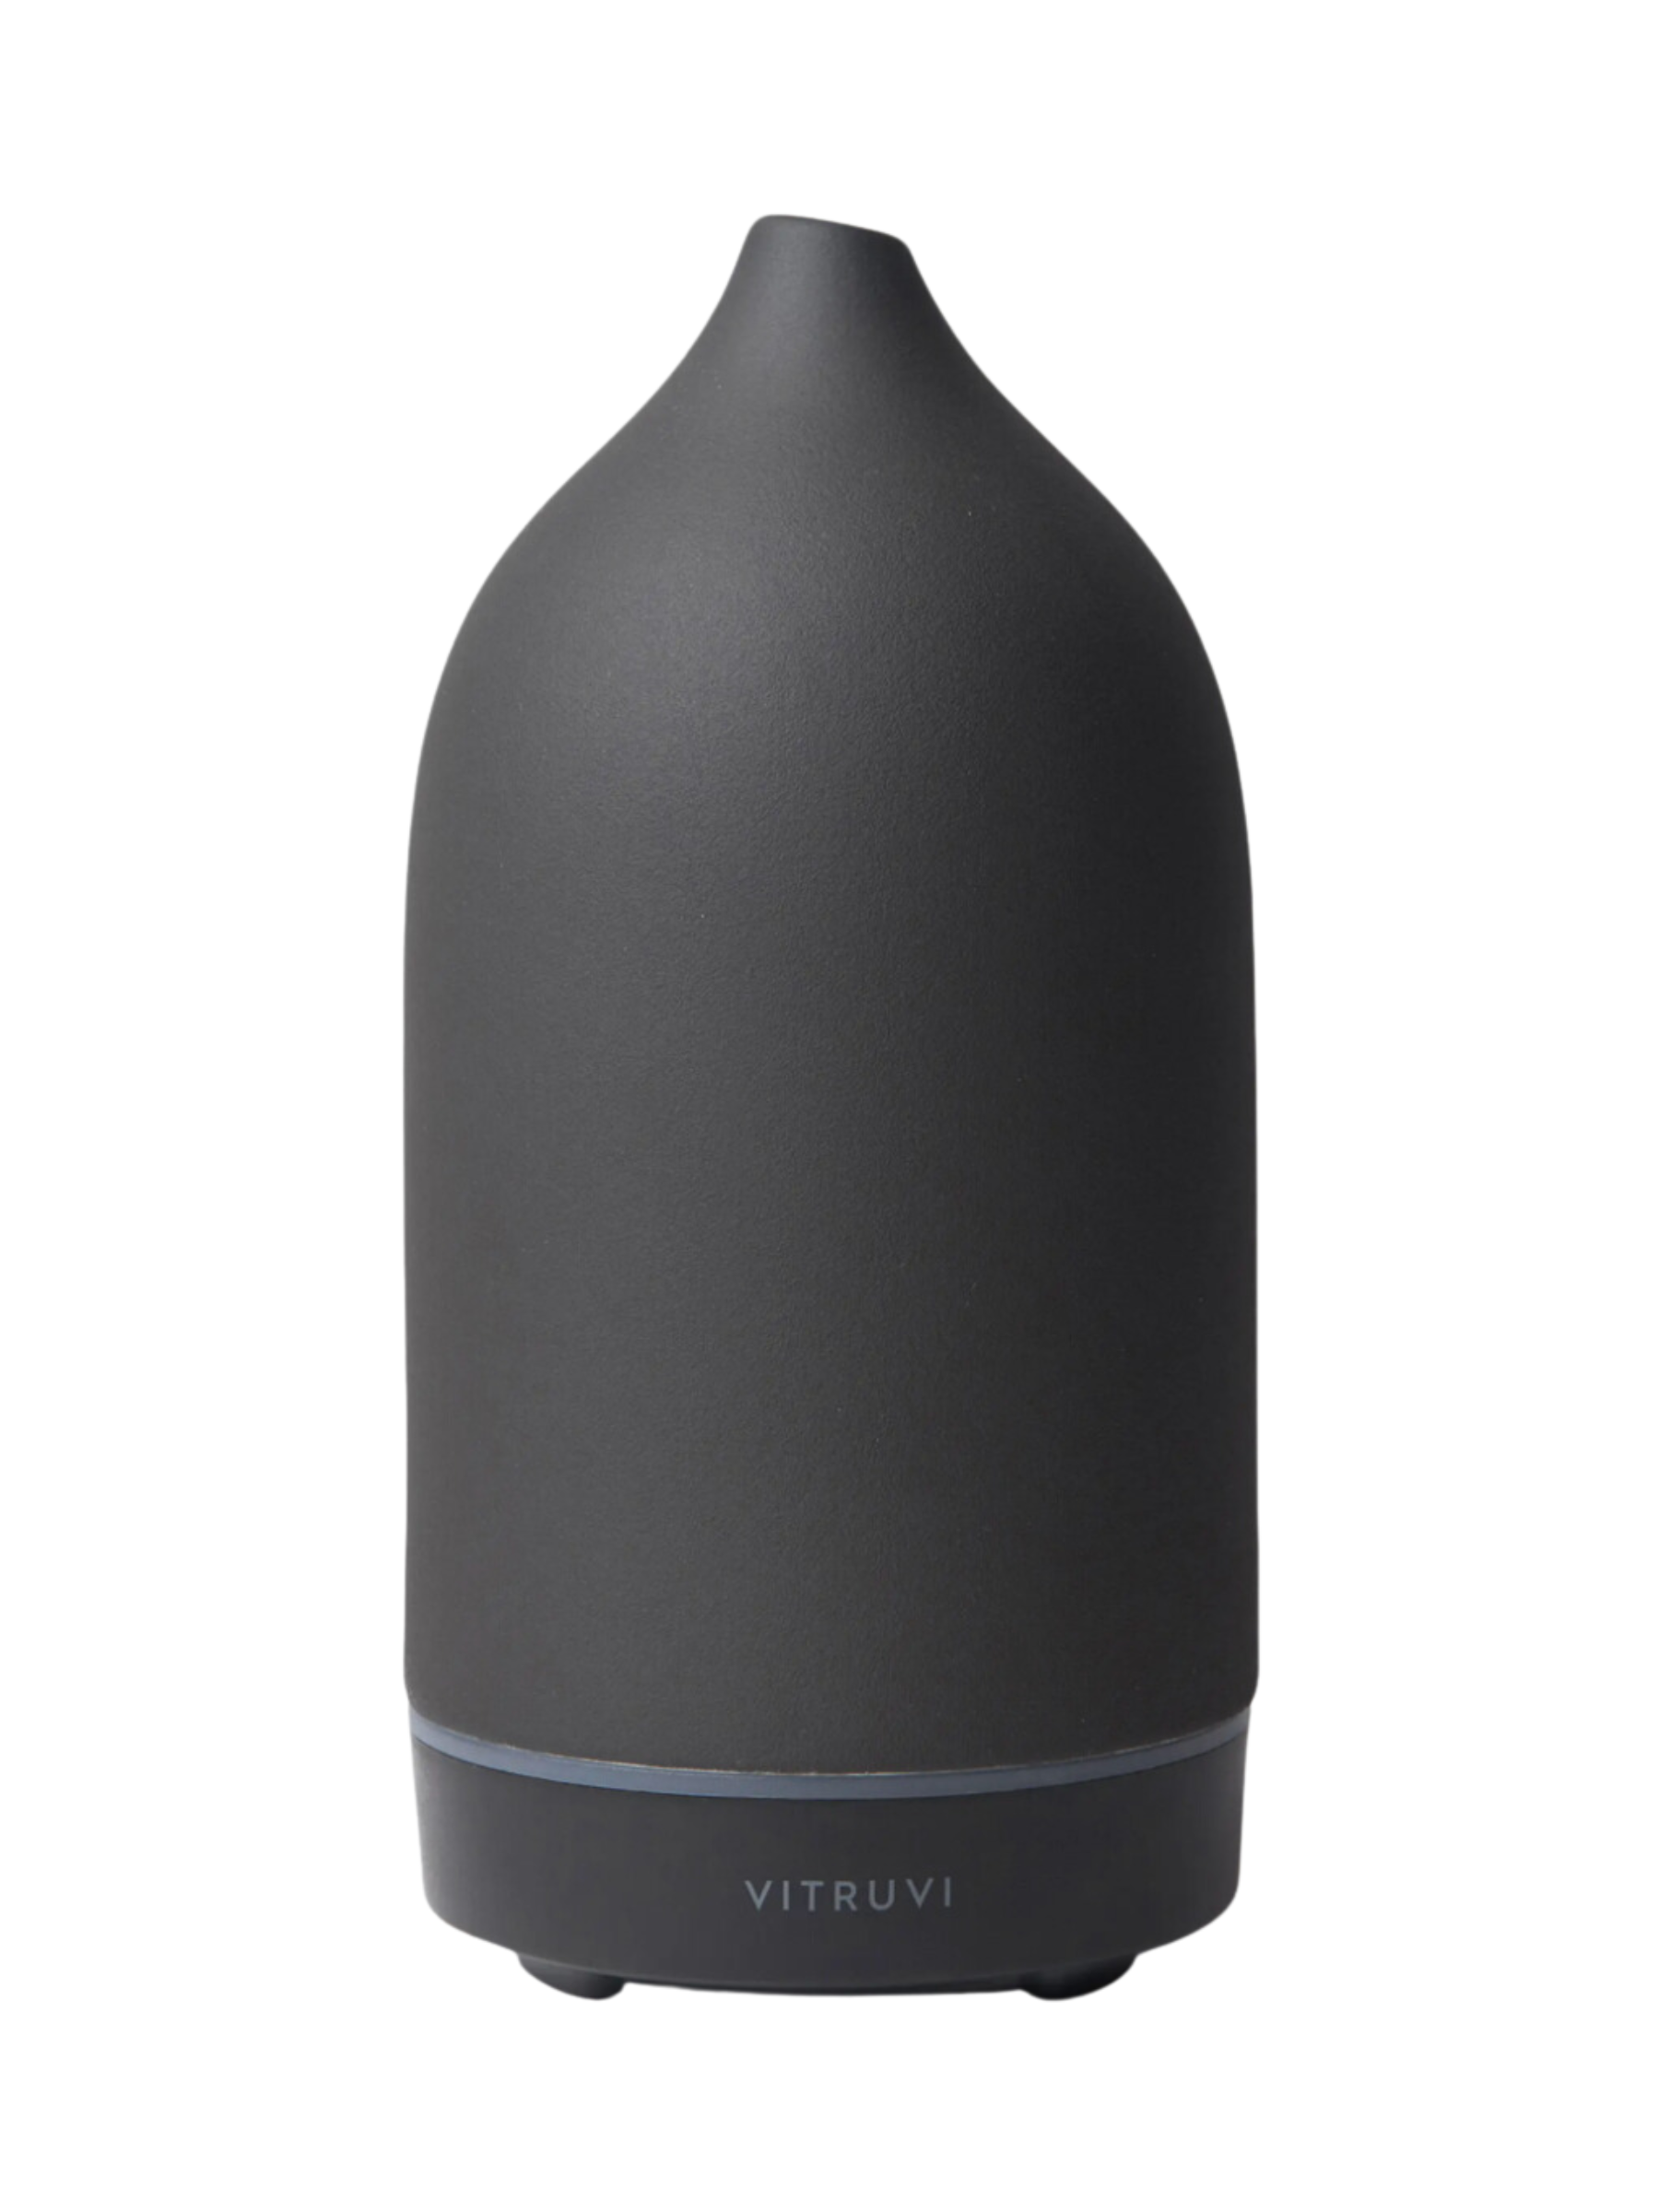 <p>Whether she swears lavender oil is the only way to achieve inner peace or just likes her house to smell as fresh as the spa, this sleek stone diffuser will get the job done.</p> <p><em>Save when you shop the best gifts for wives with these <a href="https://www.glamour.com/coupons/nordstrom?mbid=synd_msn_rss&utm_source=msn&utm_medium=syndication">Nordstrom promo codes</a>.</em></p> $123, Nordstrom. <a href="https://www.nordstrom.com/s/stone-essential-oil-diffuser/4632548">Get it now!</a><p>Sign up for today’s biggest stories, from pop culture to politics.</p><a href="https://www.glamour.com/newsletter/news?sourceCode=msnsend">Sign Up</a>